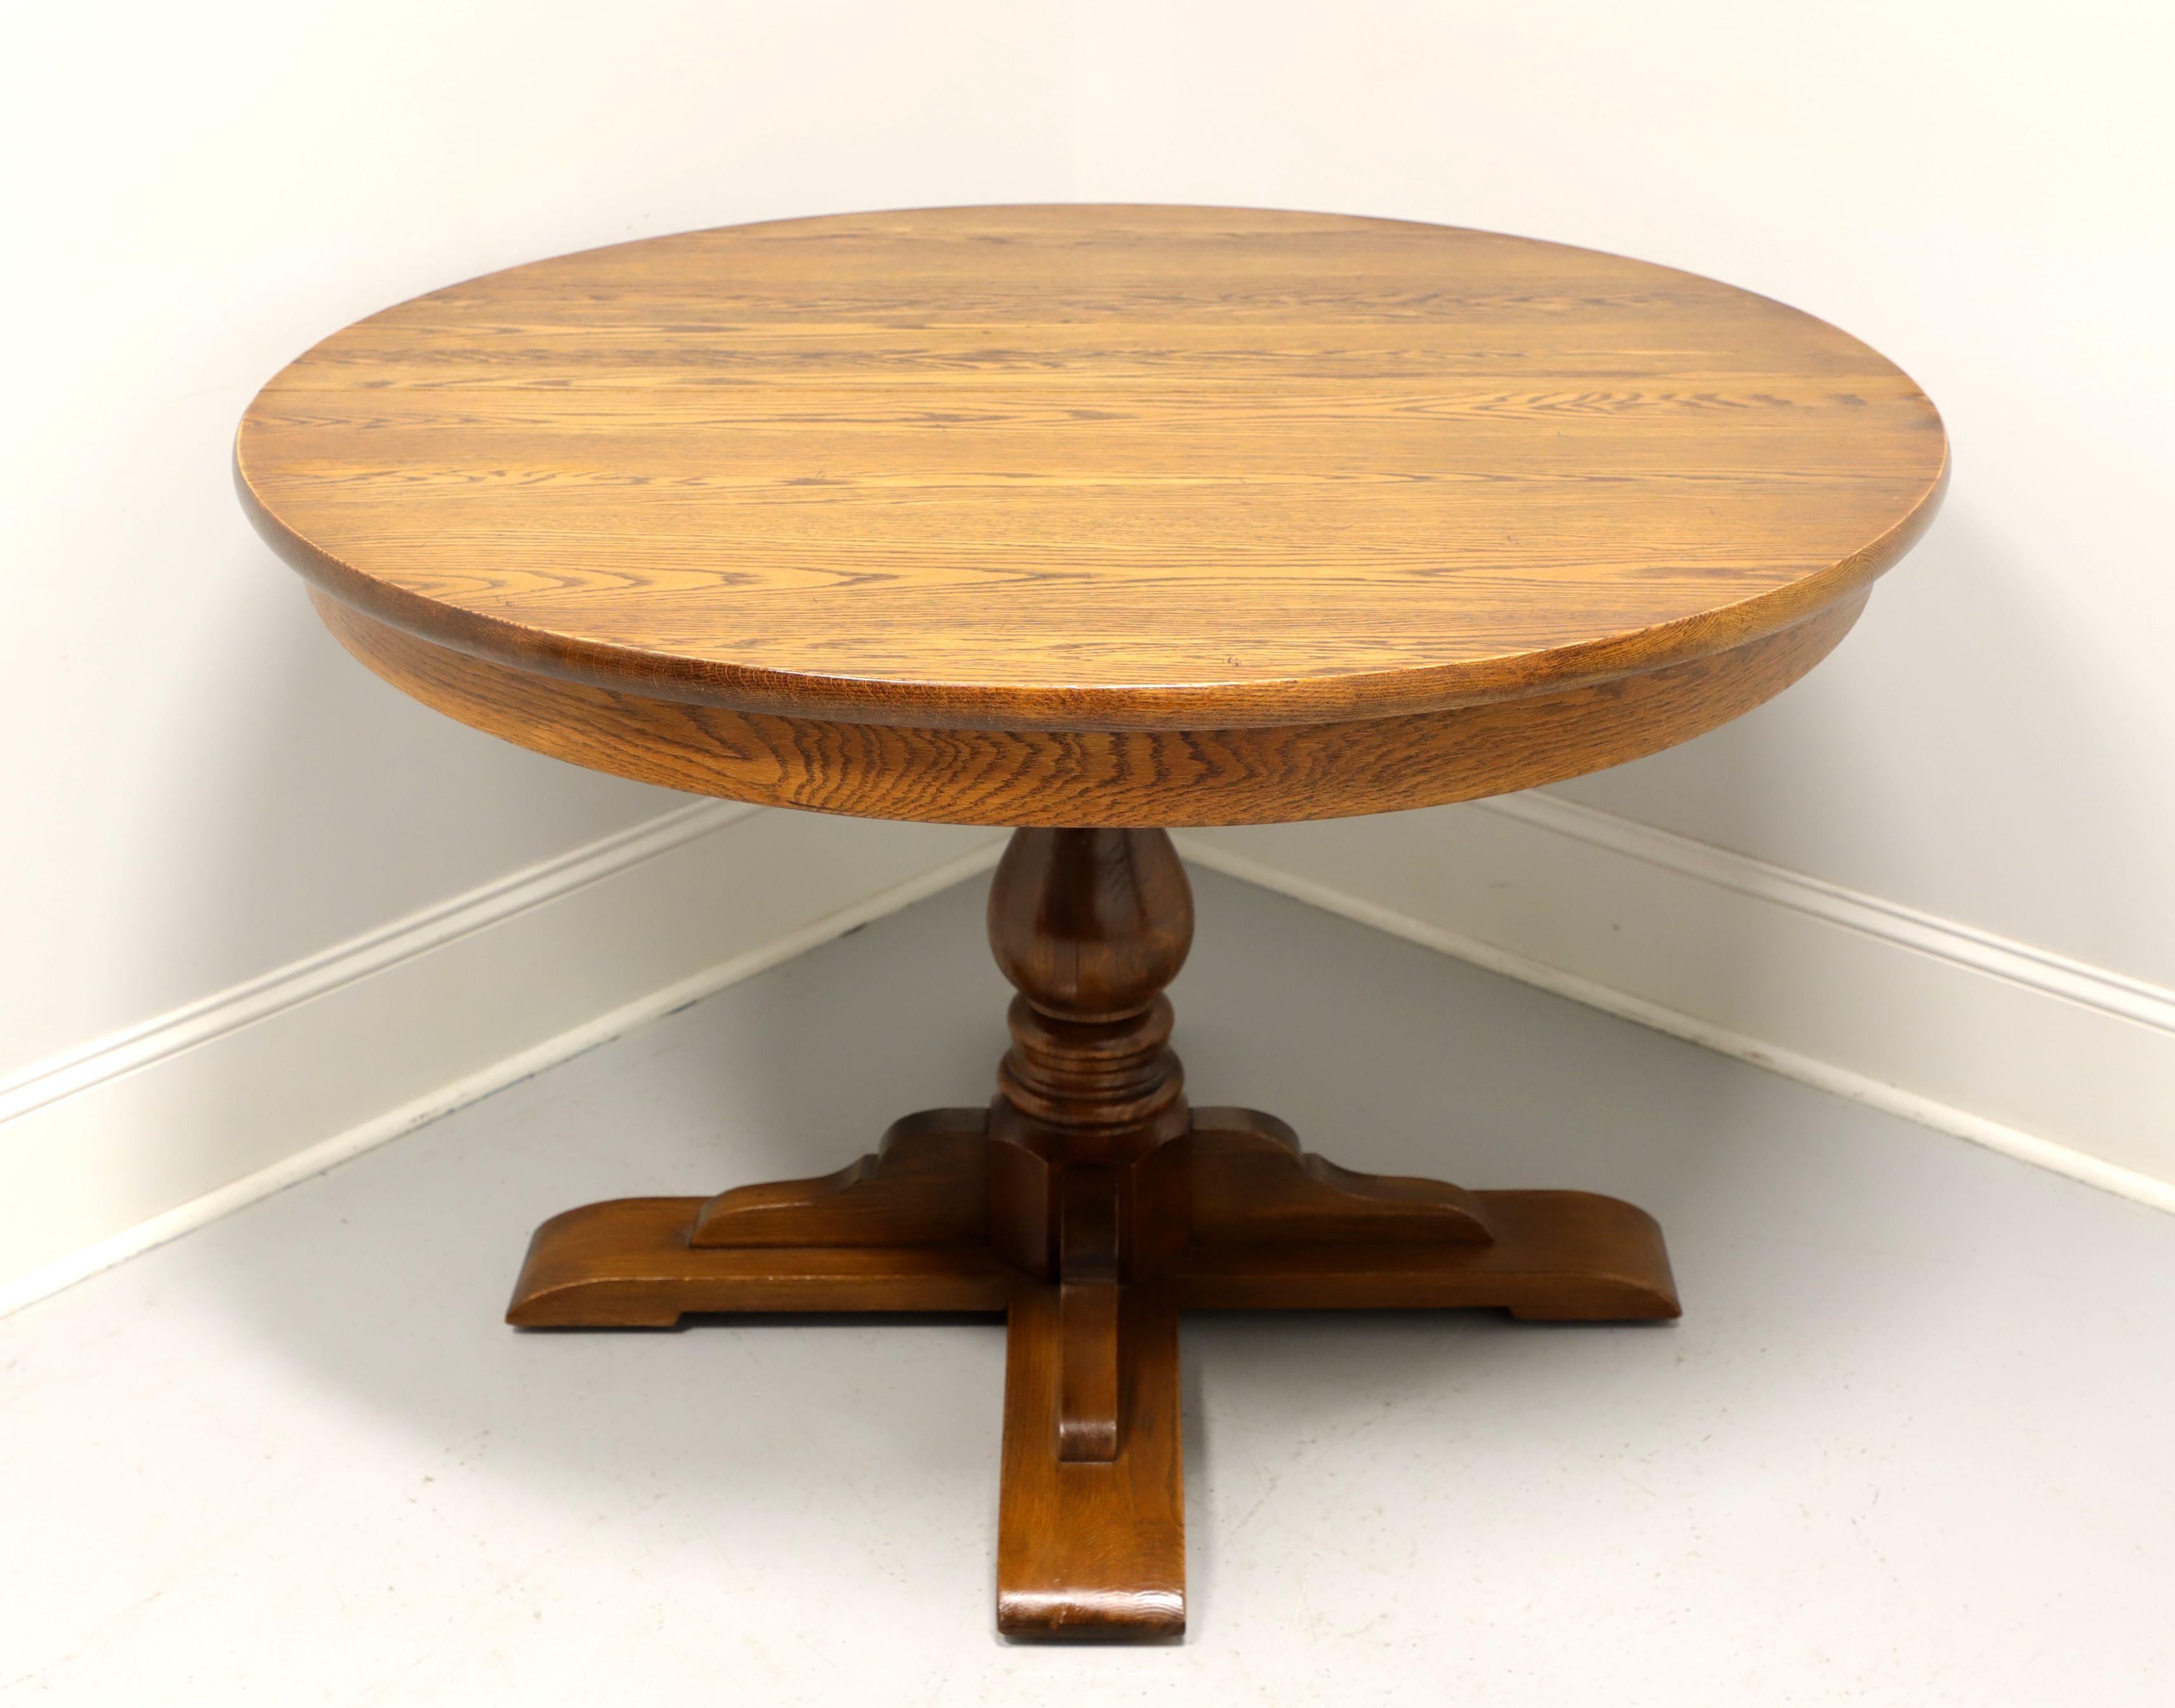 A vintage Rustic style round dining table by Hale Furniture of East Arlington, Vermont, USA. Solid oak, smooth apron, turned pedestal base with four bracket legs on flat bracket feet. Wood expansion slider. Includes two extension leaves that make